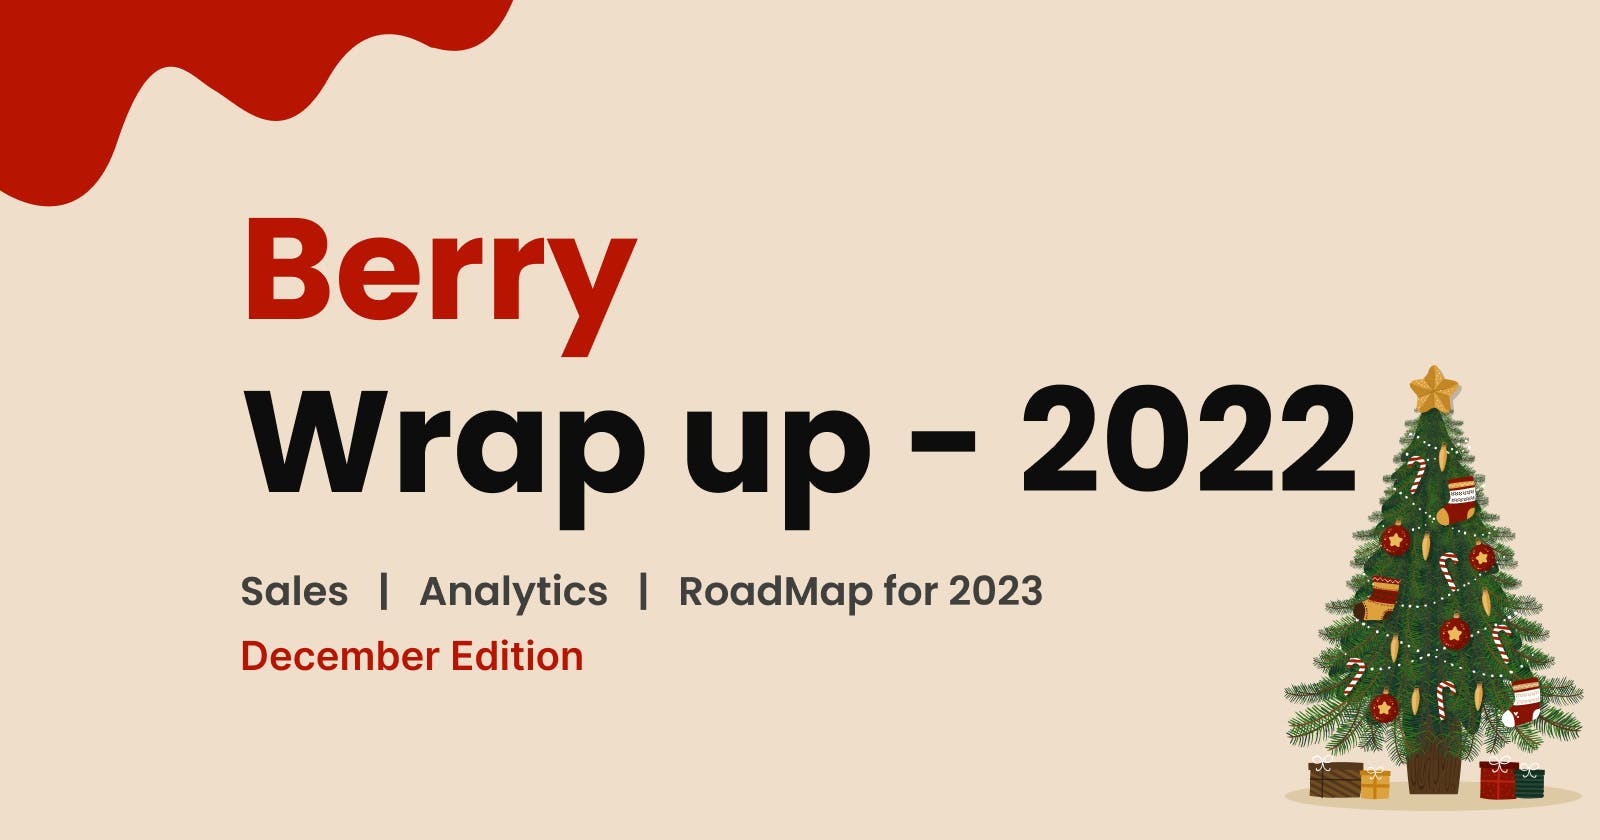 Year Wrap-up 2022 - December Edition